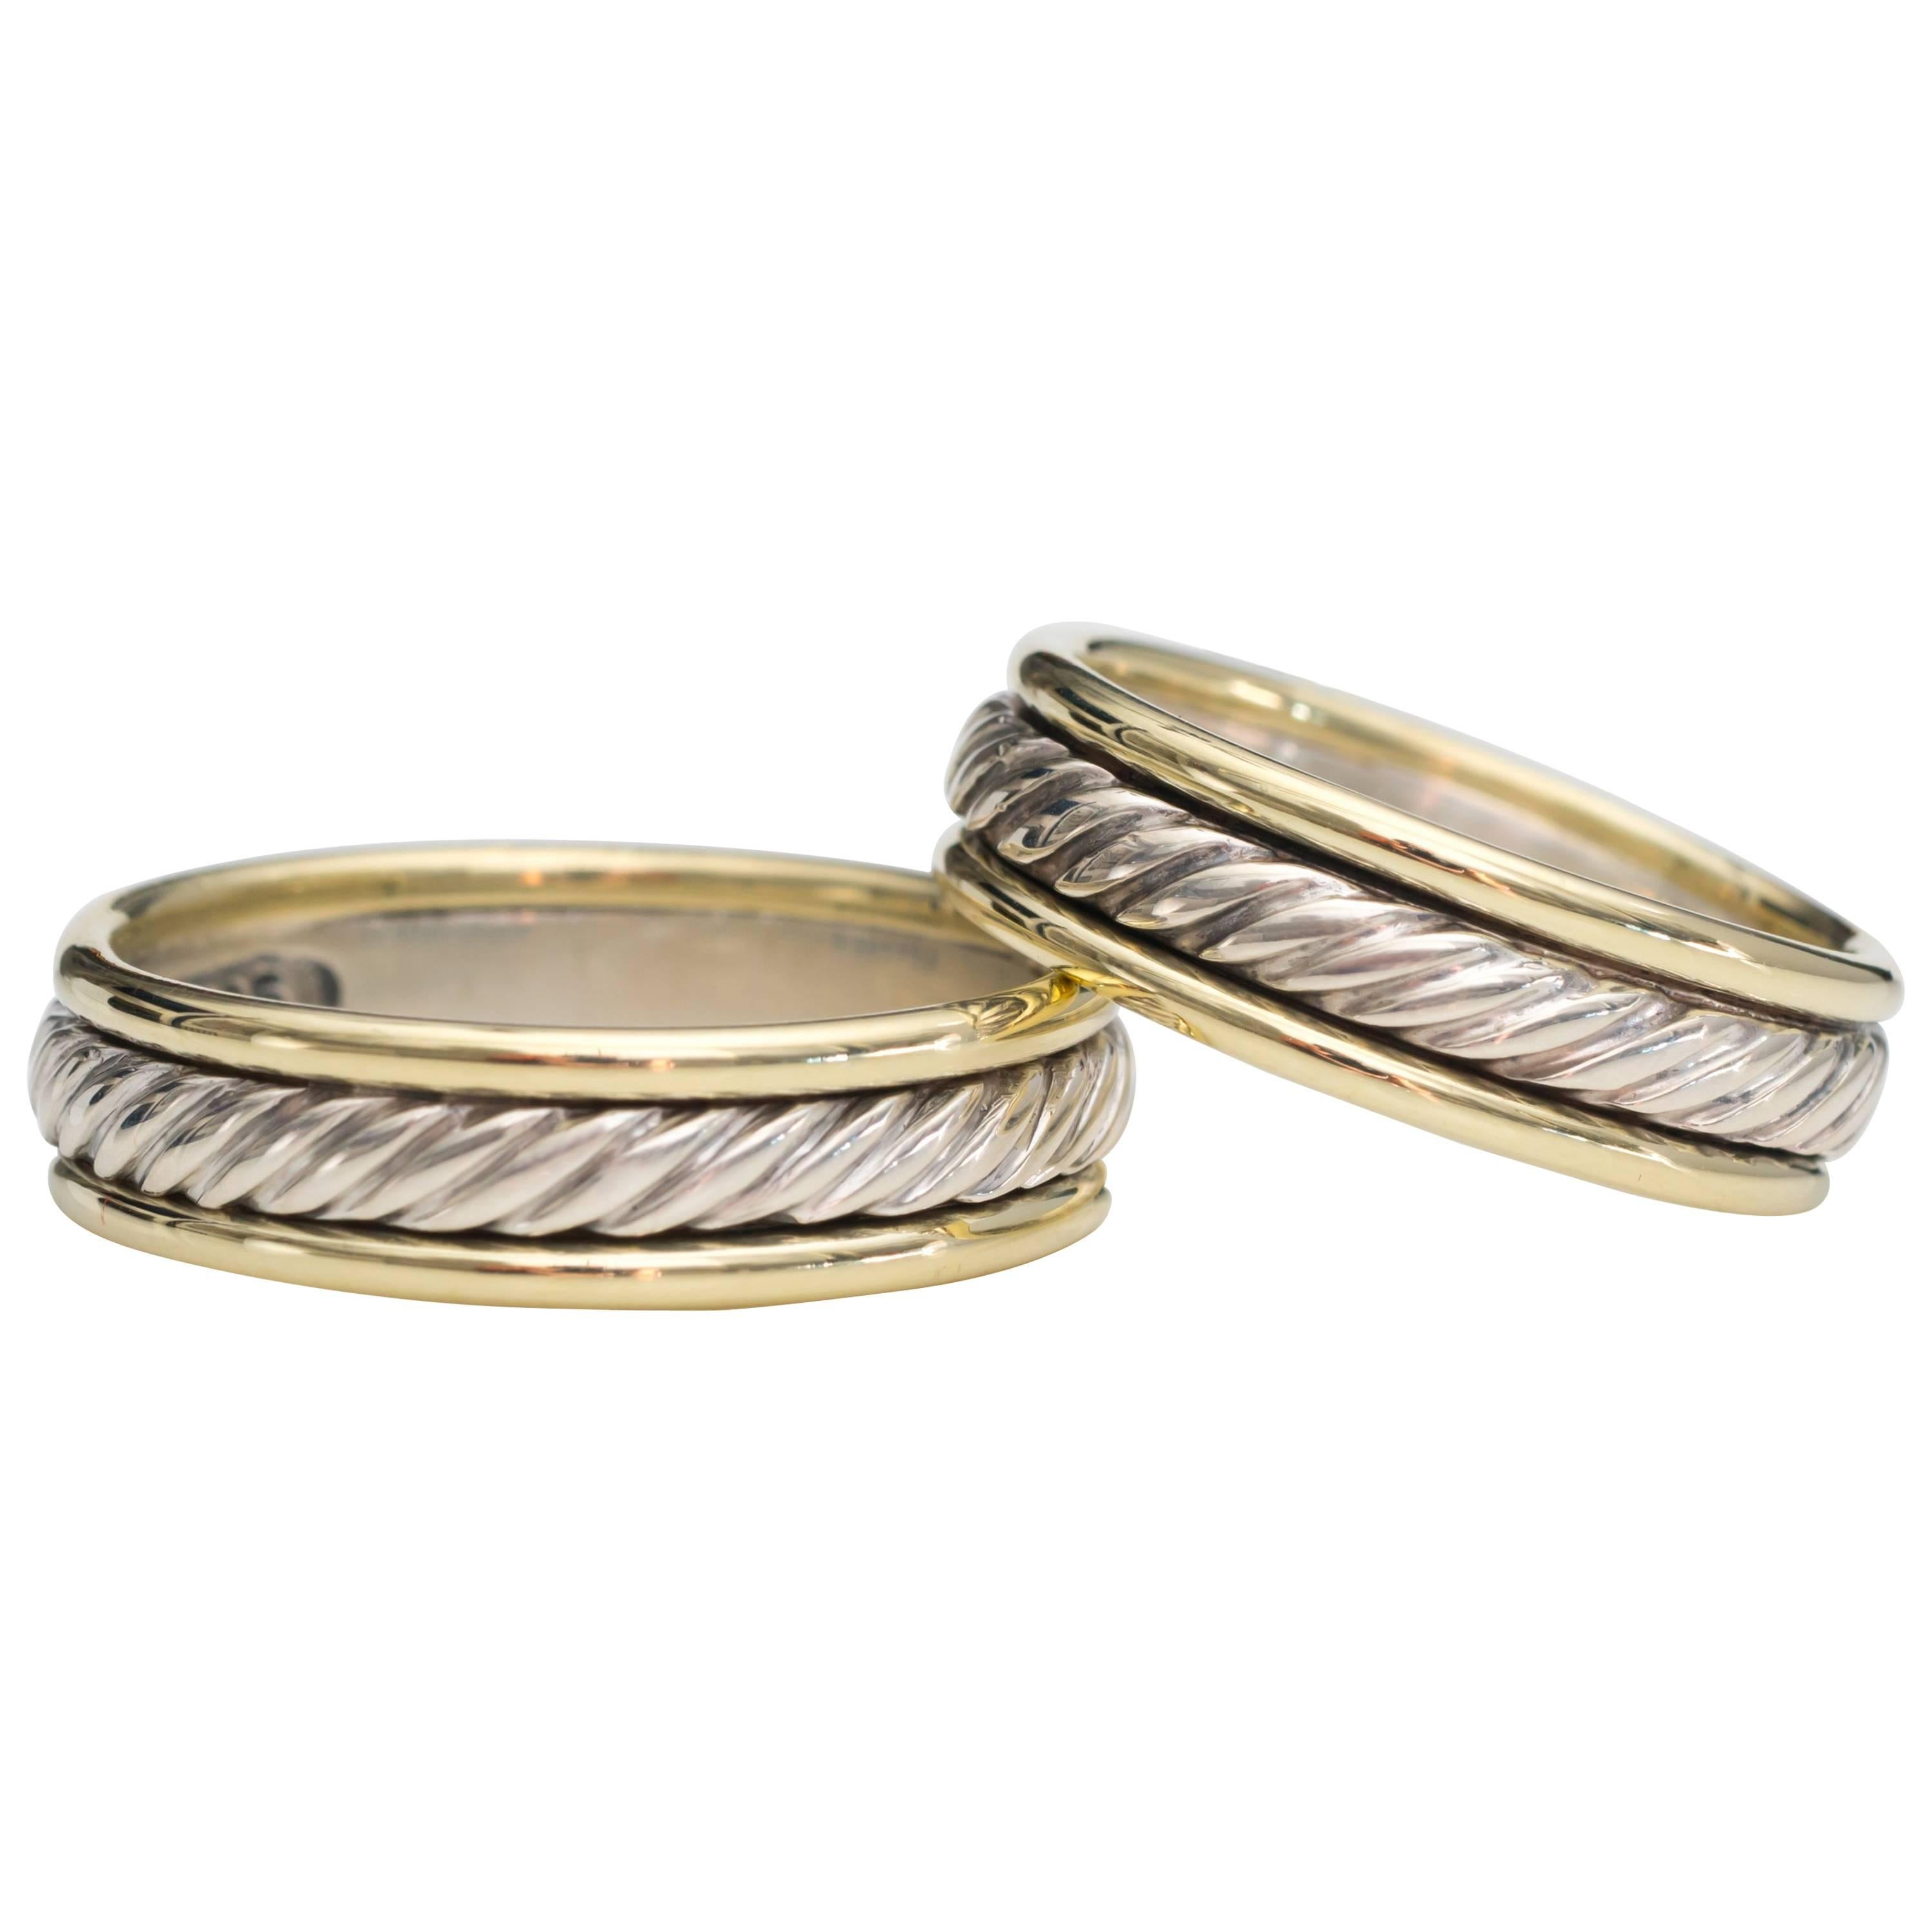 David Yurman Cable Wedding Bands in 14 Karat Gold, Sterling Silver, Set of Two